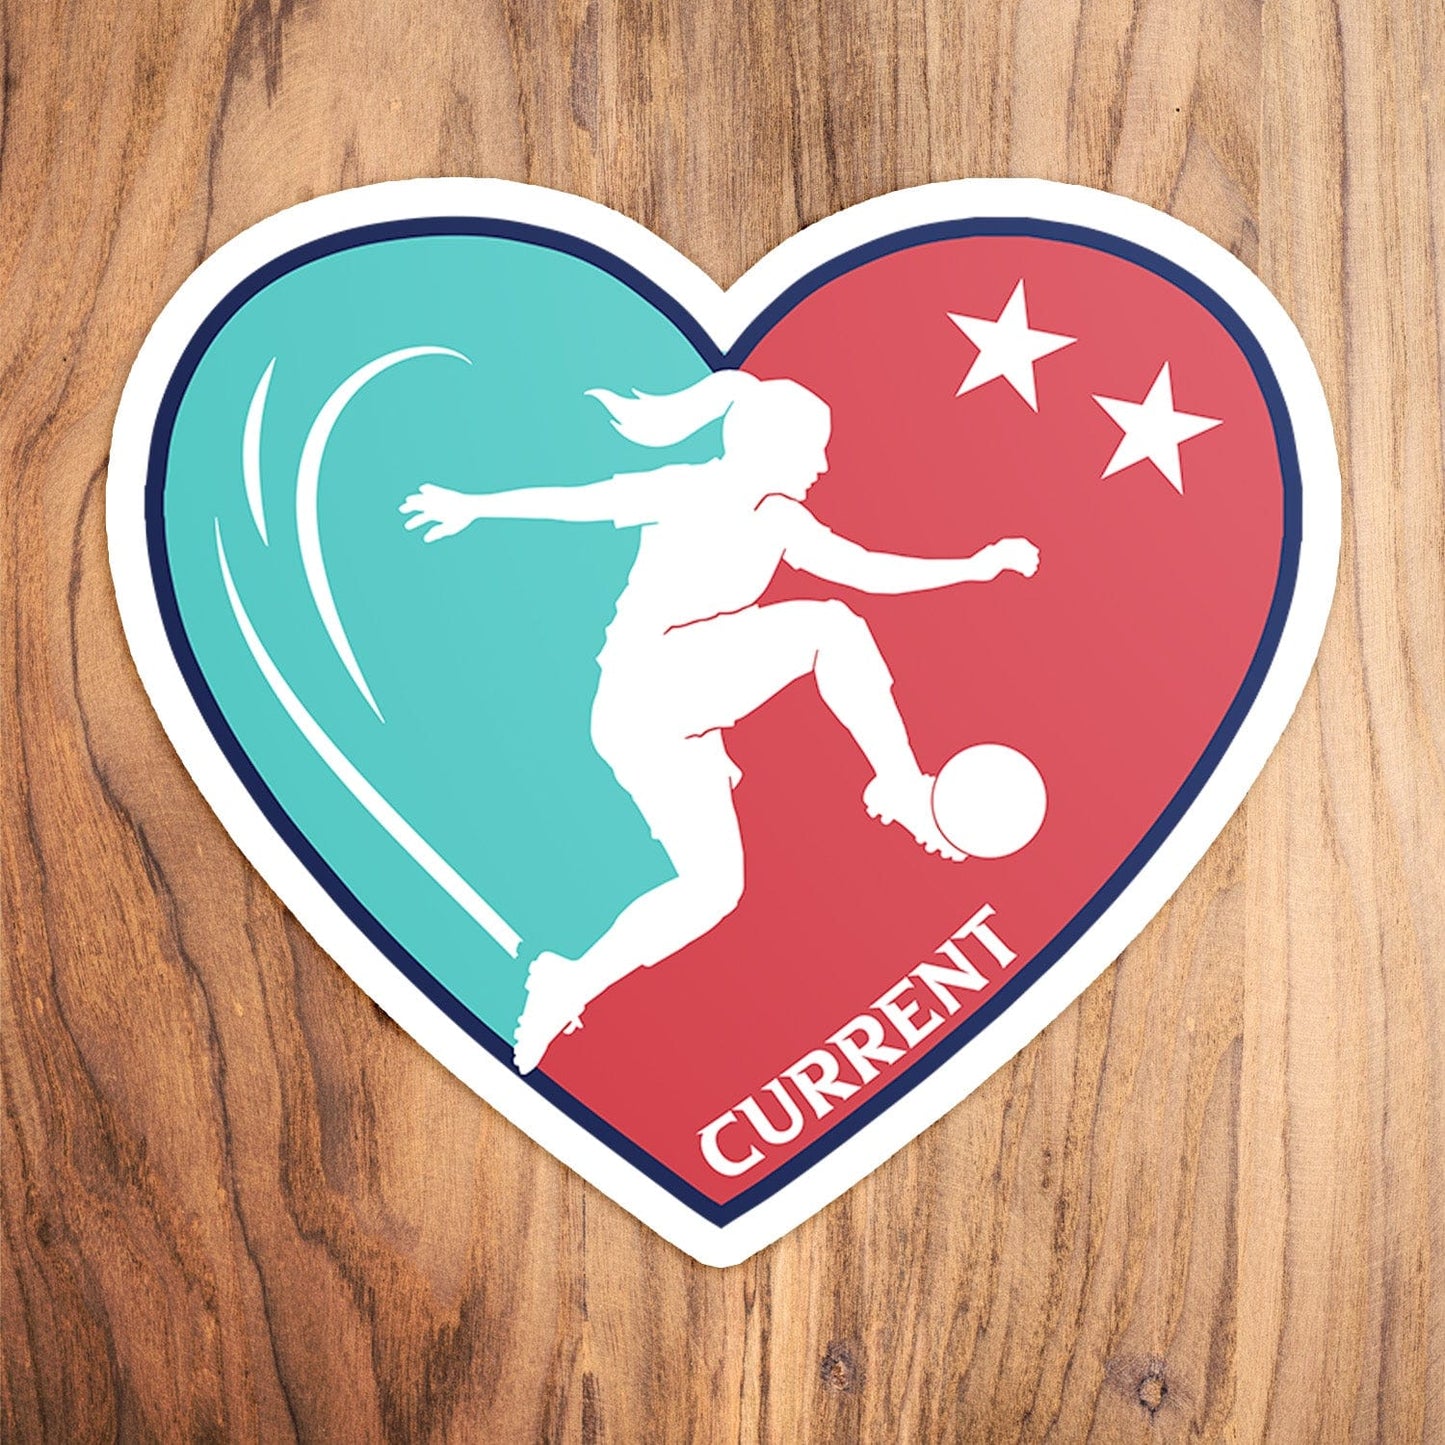 KC Swag Kansas City Current PLAYER HEART die-cut sticker decal made from waterproof vinyl on wood table